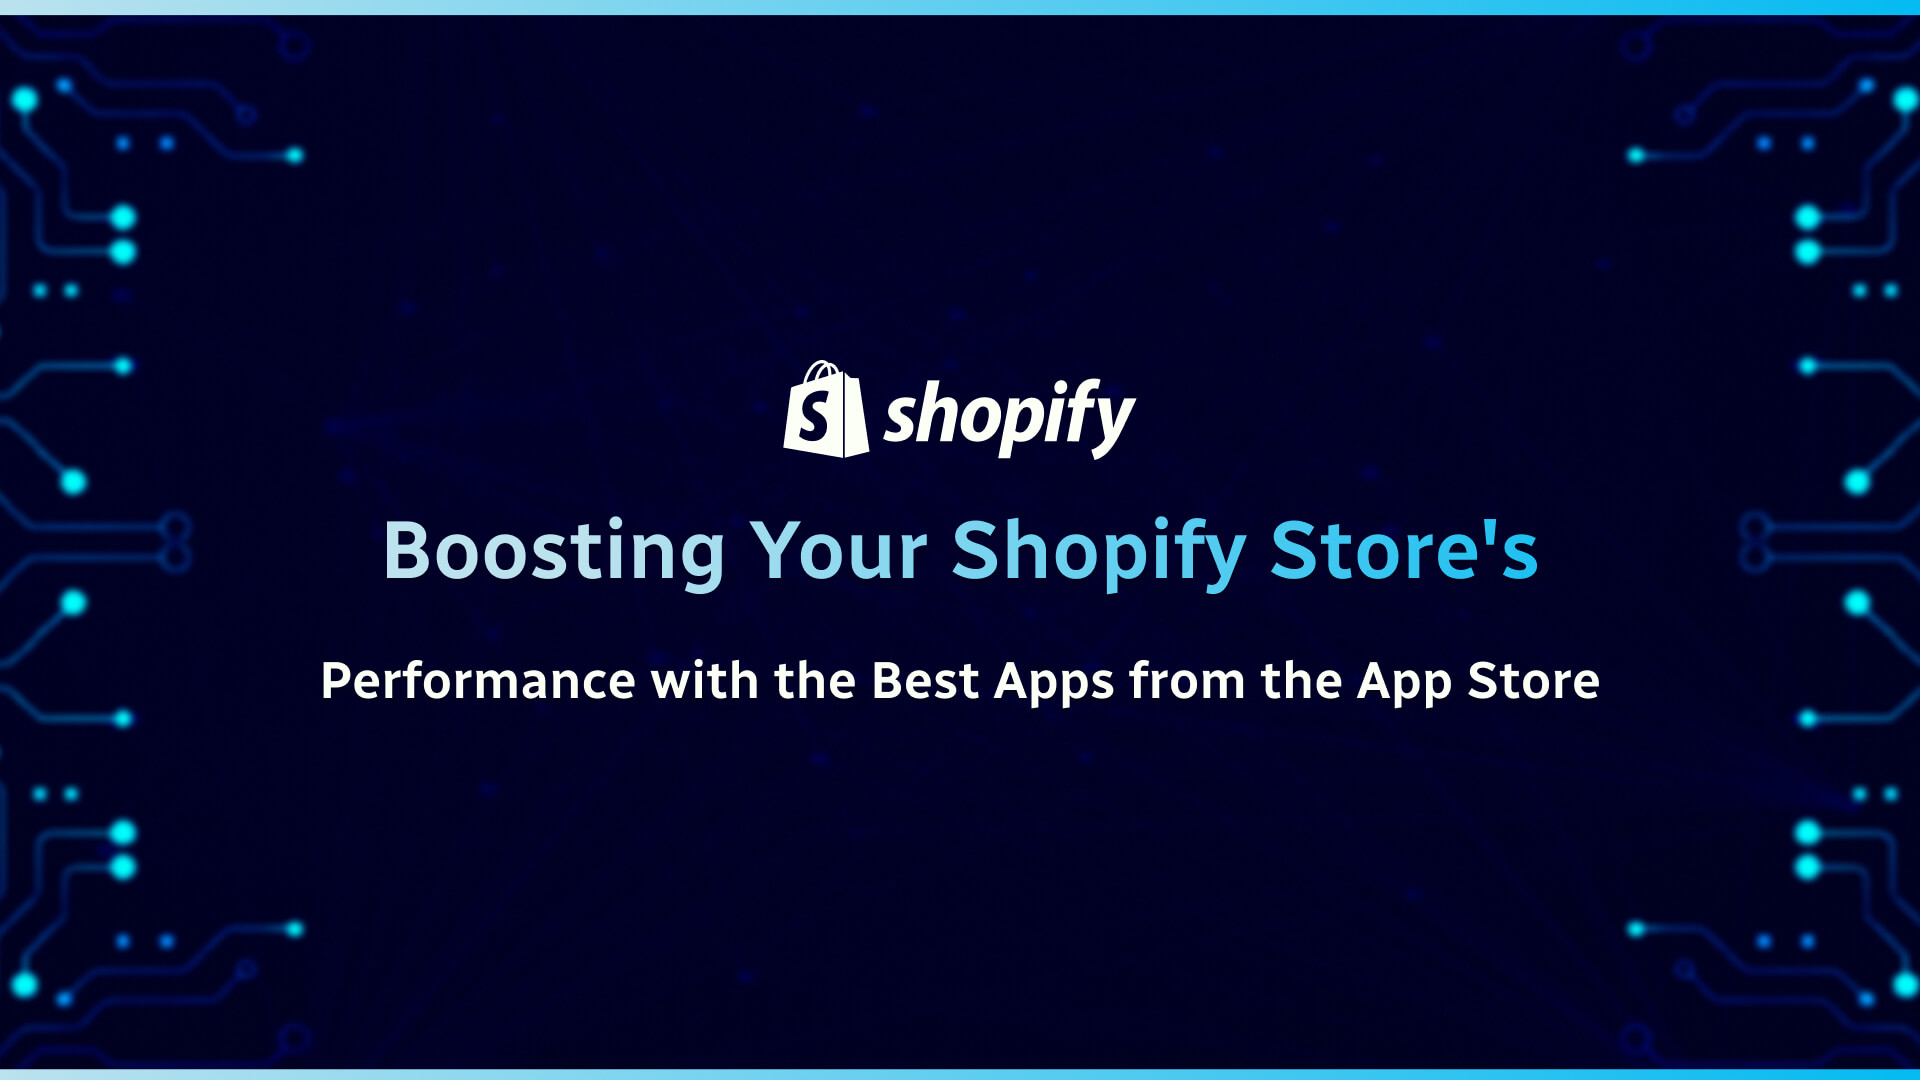 Boosting Your Shopify Store’s Performance with the Best Apps from the App Store